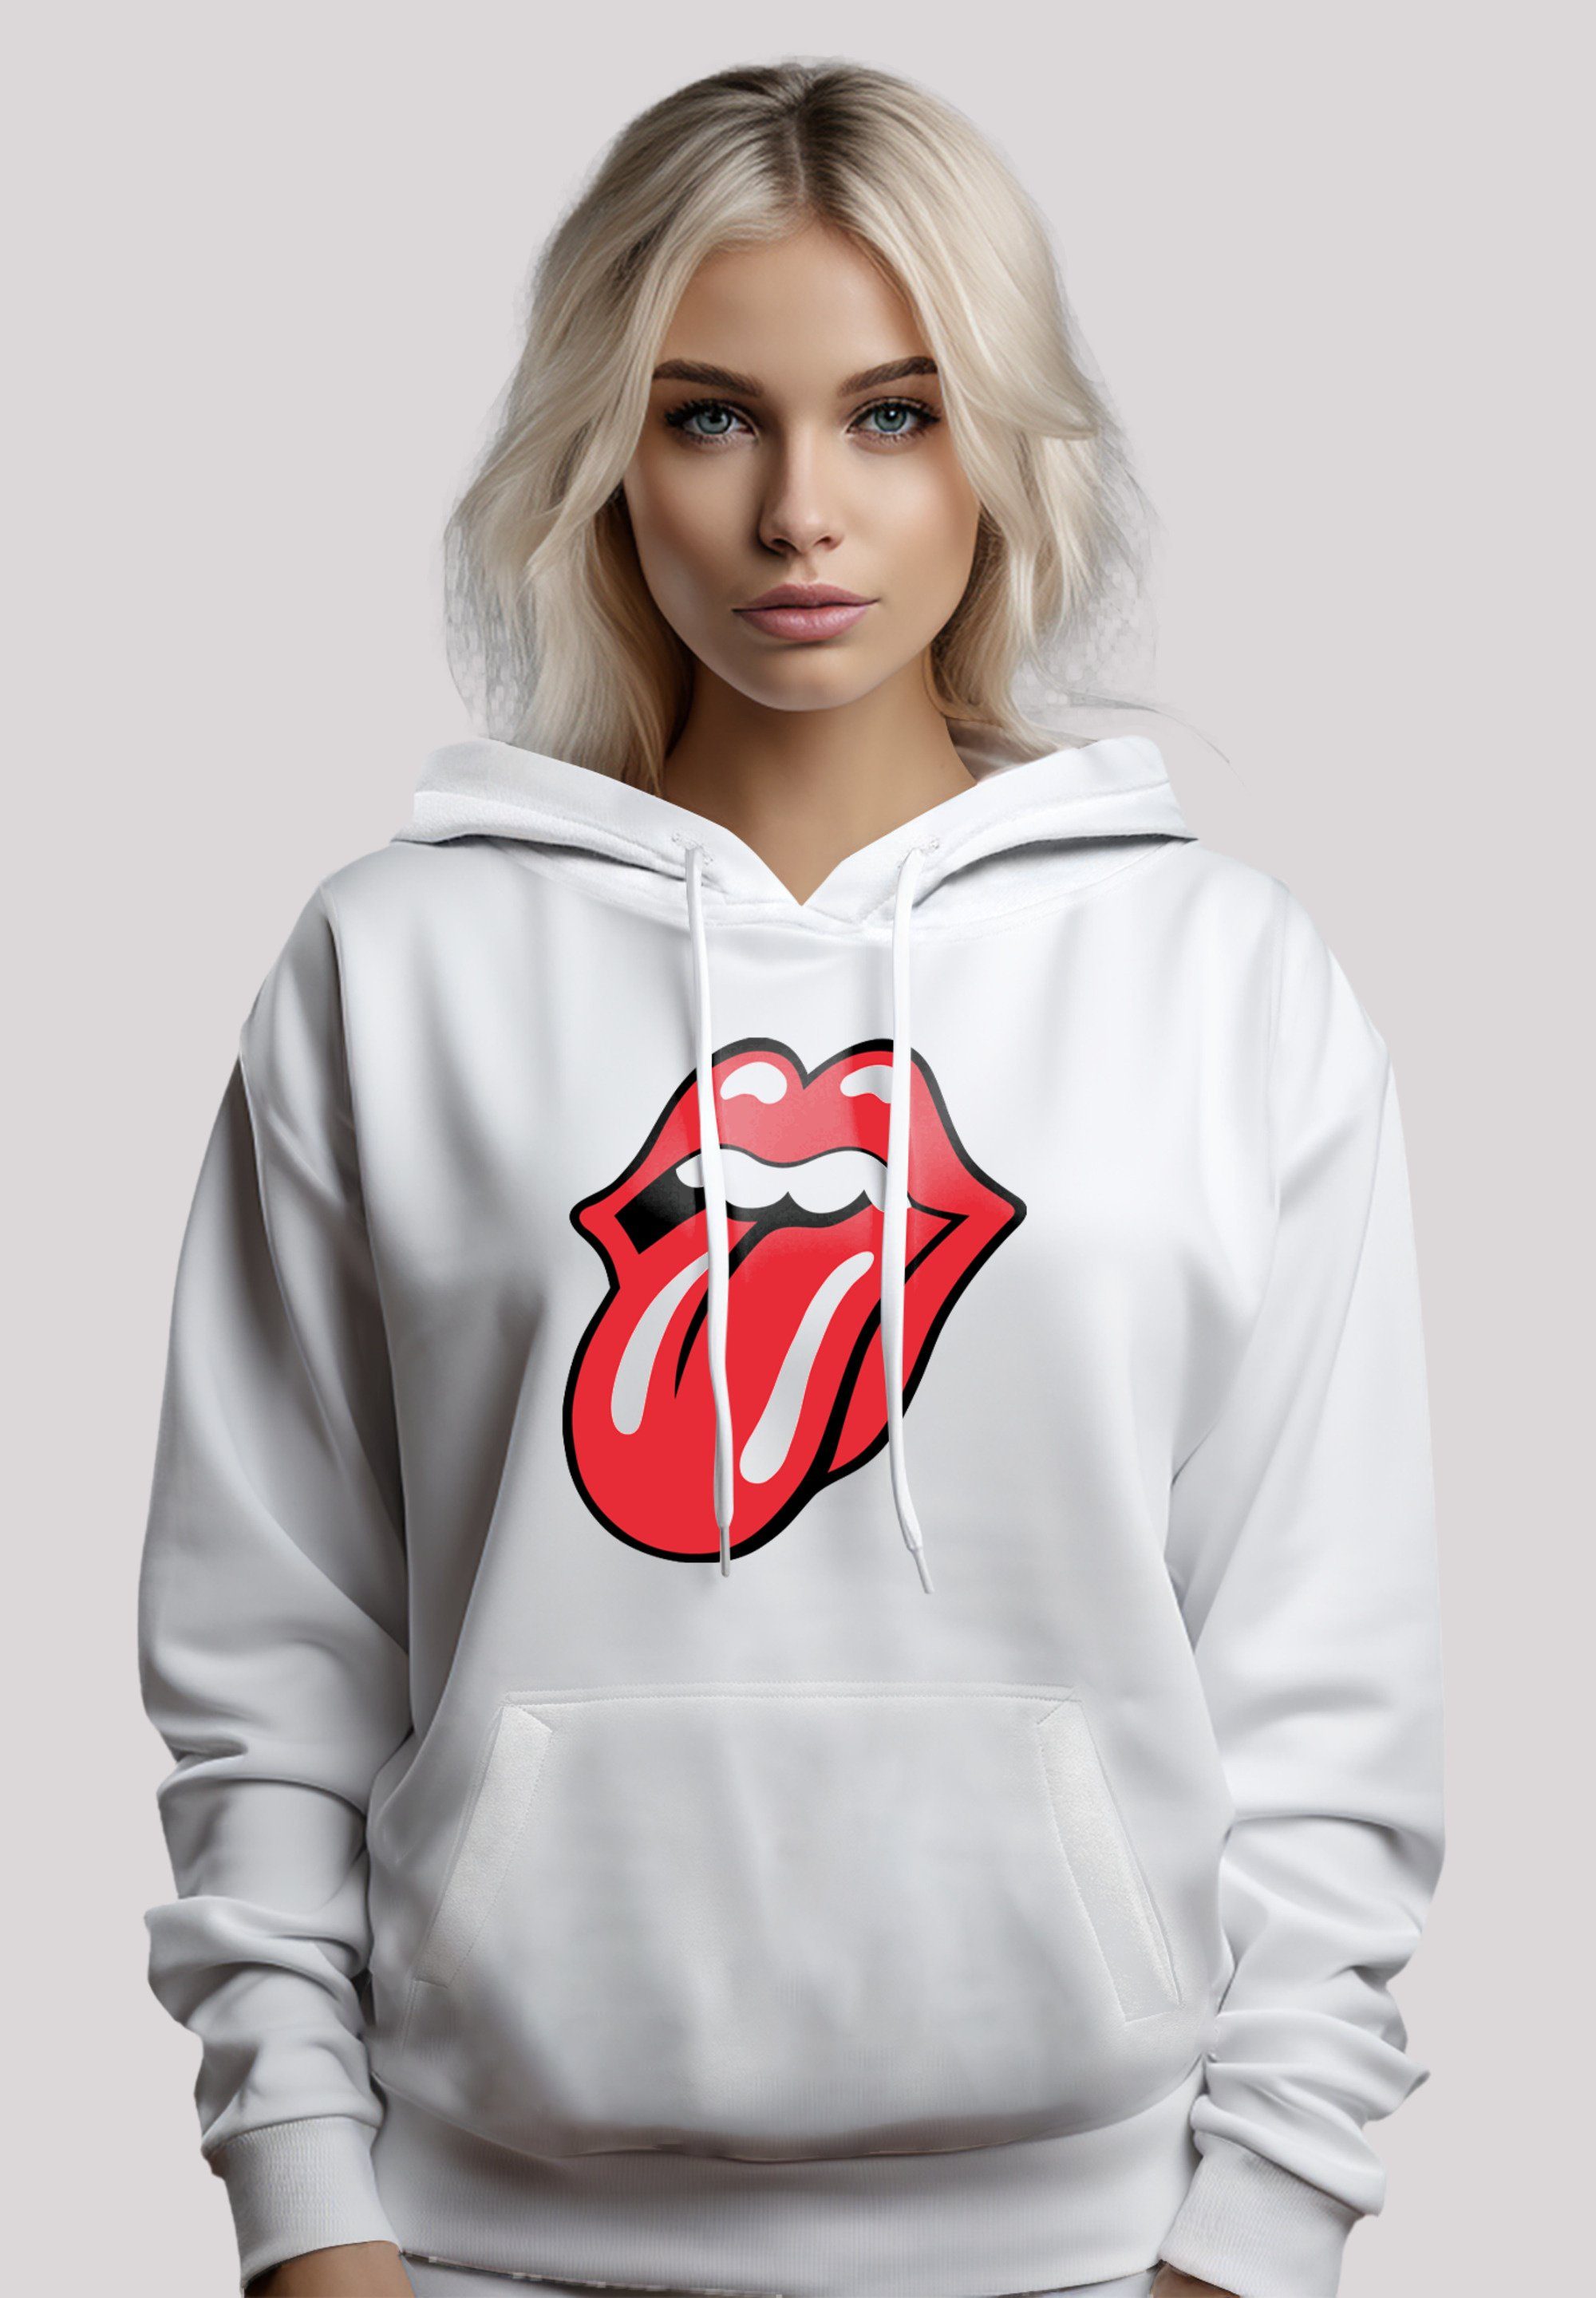 Rock Hoodie, Classic Rolling weiß Bequem The Zunge Stones Warm, Kapuzenpullover F4NT4STIC Musik Band